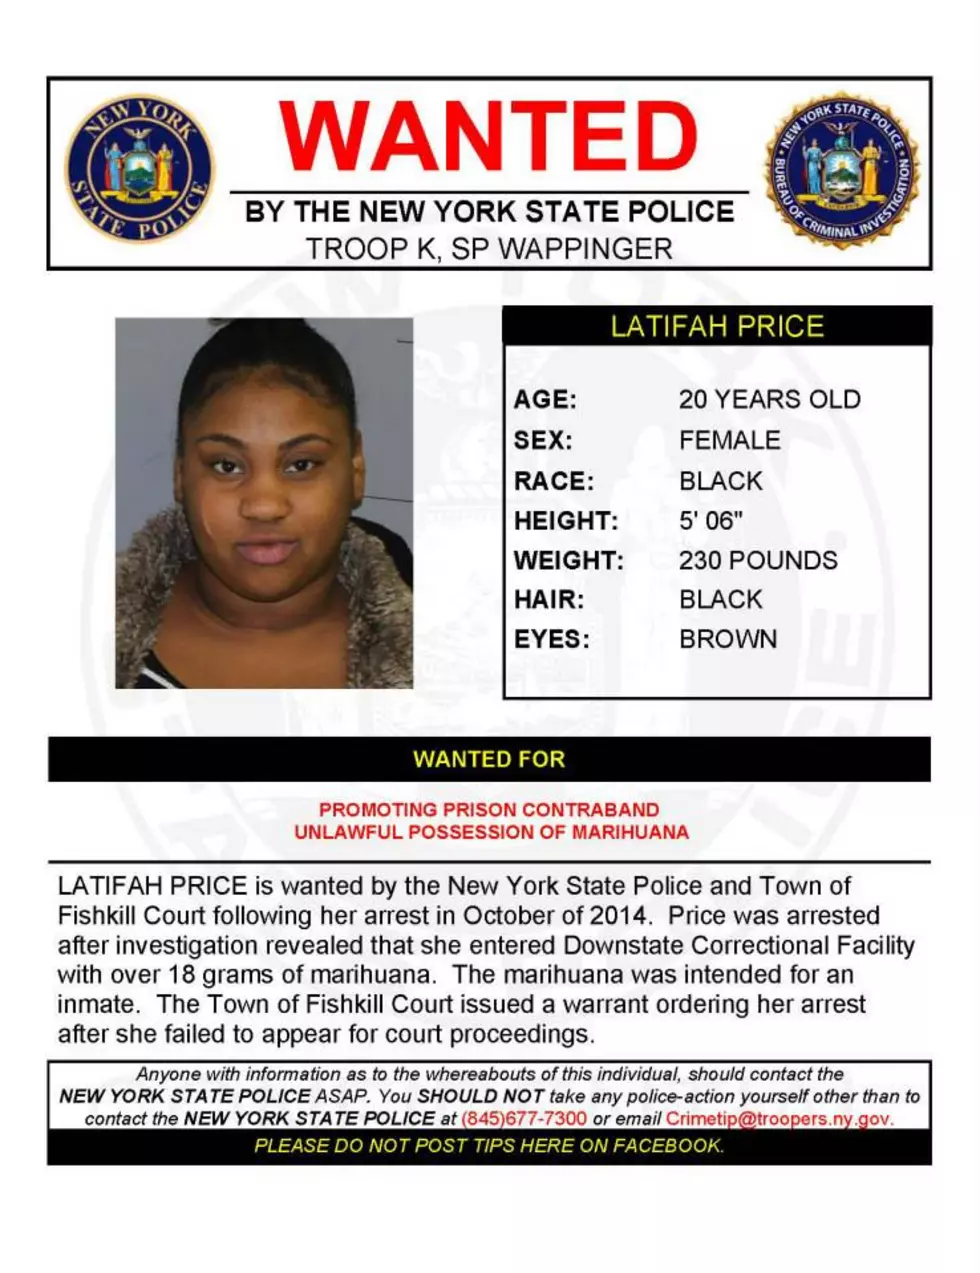 Warrant Wednesday: Dutchess County Woman Wanted for Allegedly Promoting Prison Contraband